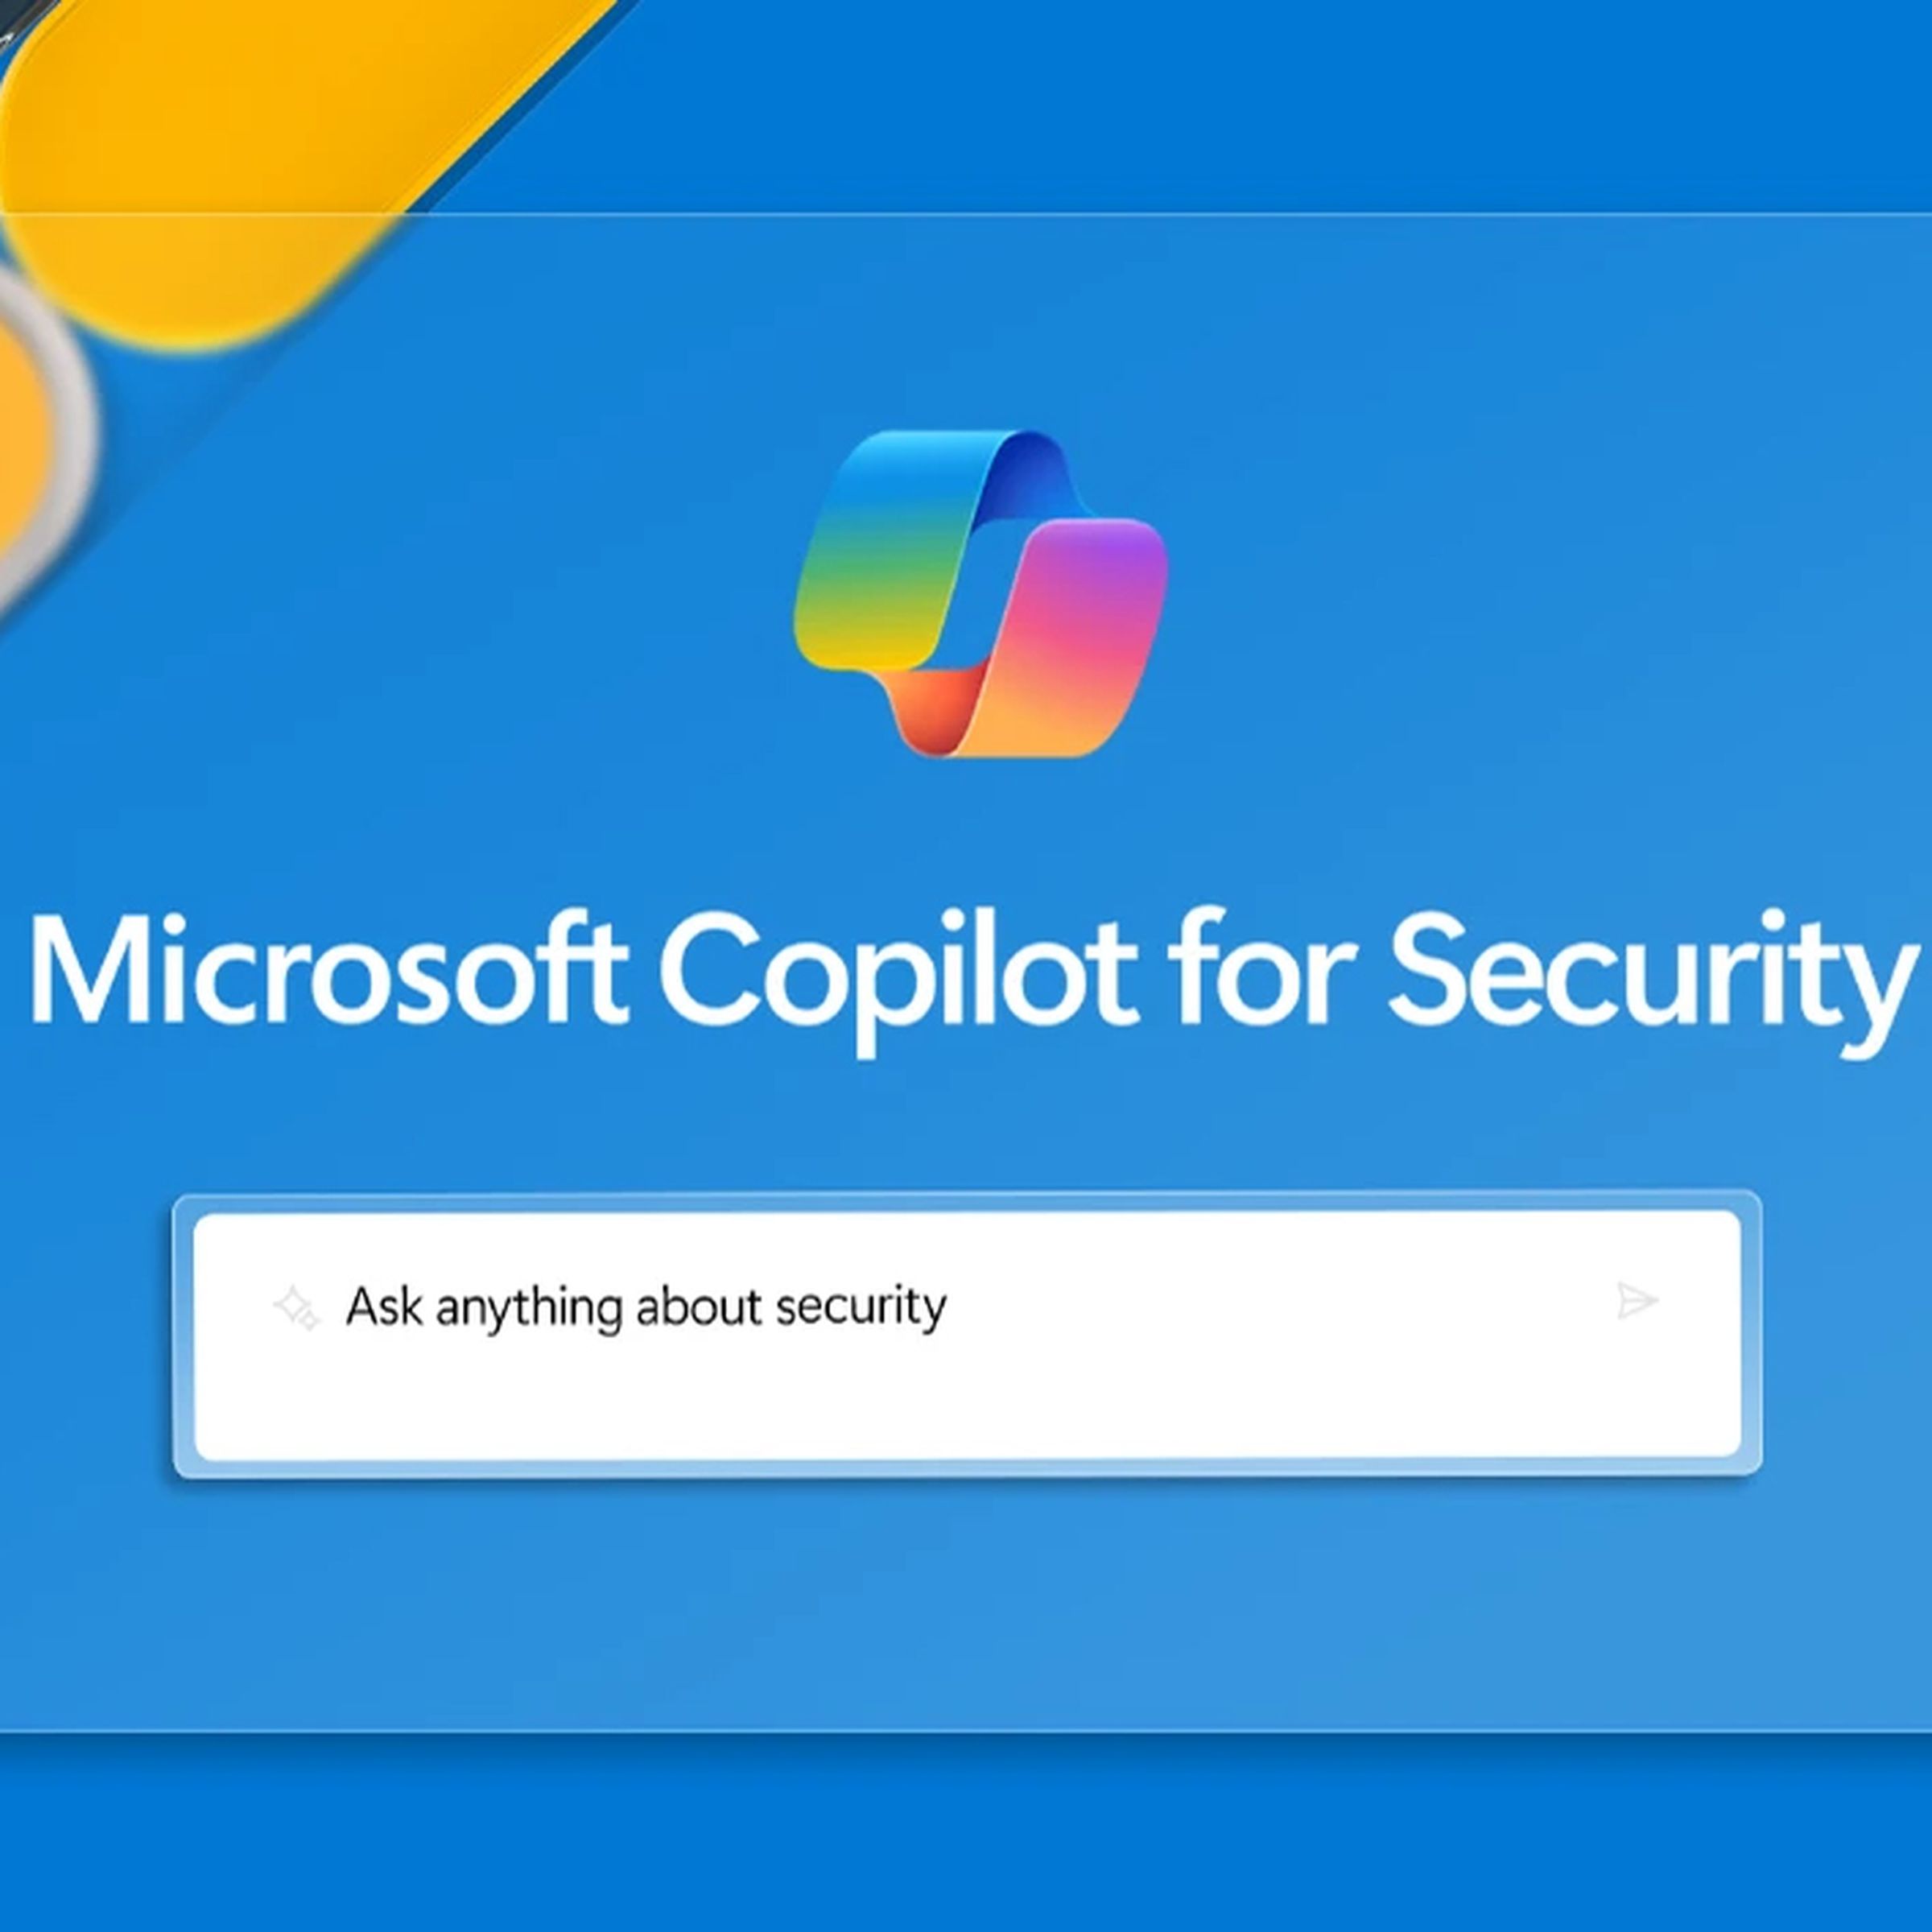 Illustration of Microsoft Copilot for Security